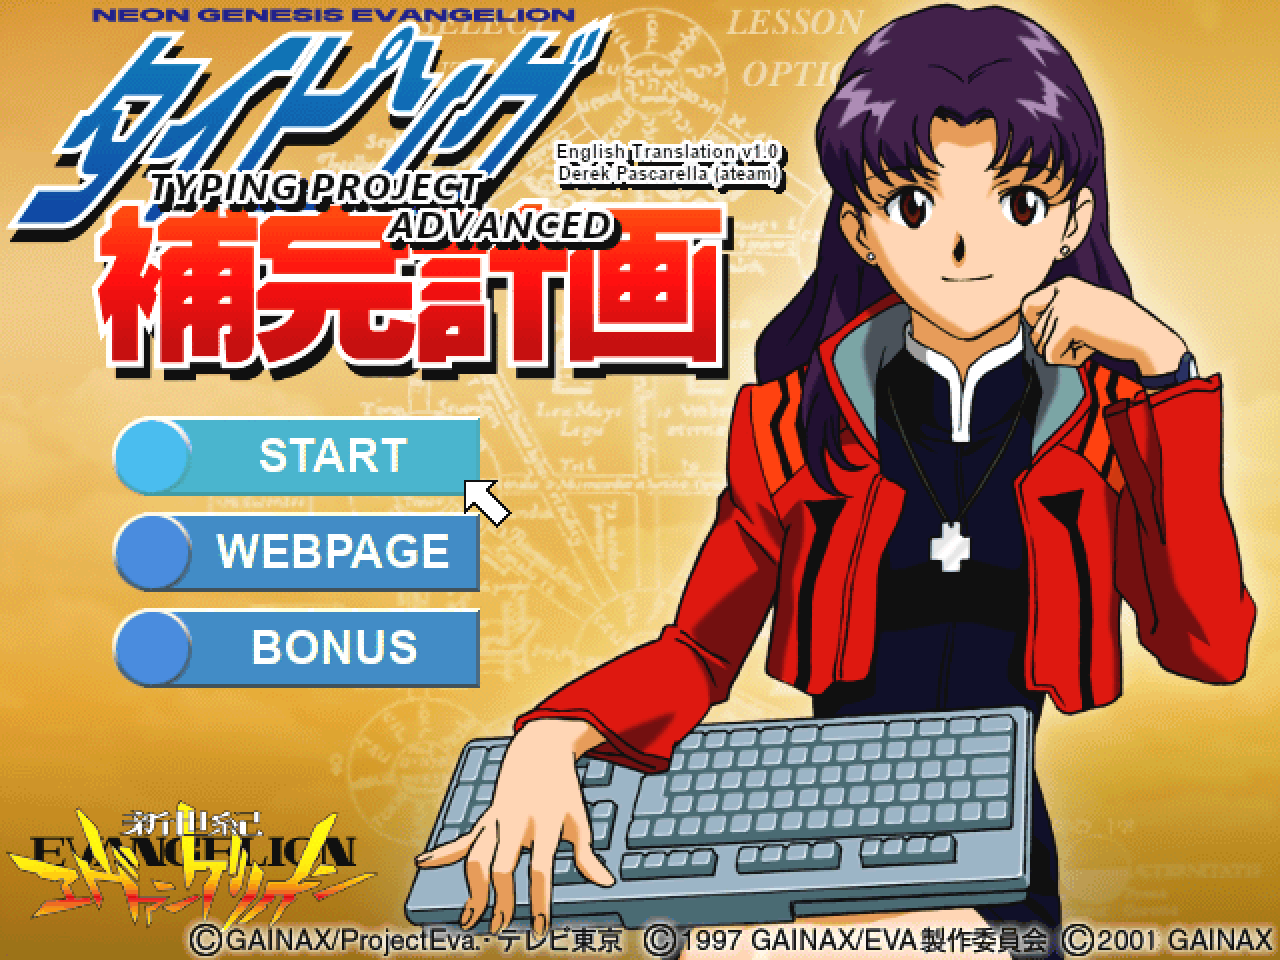 [v1.0 complete] English translation patch release for "Neon Genesis Evangelion - Typing Project Advanced"